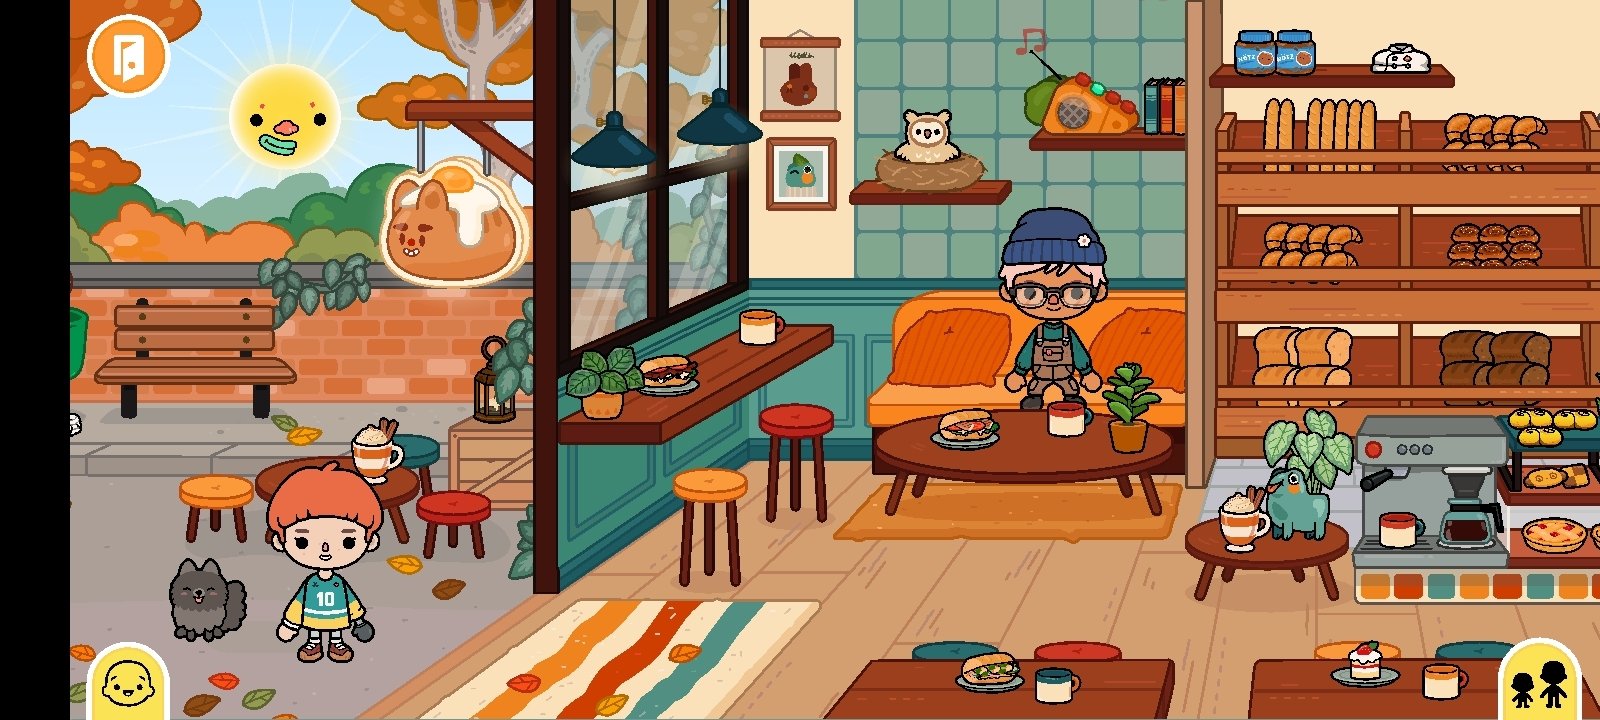 Toca Life: World Free Download for Android - APK Games